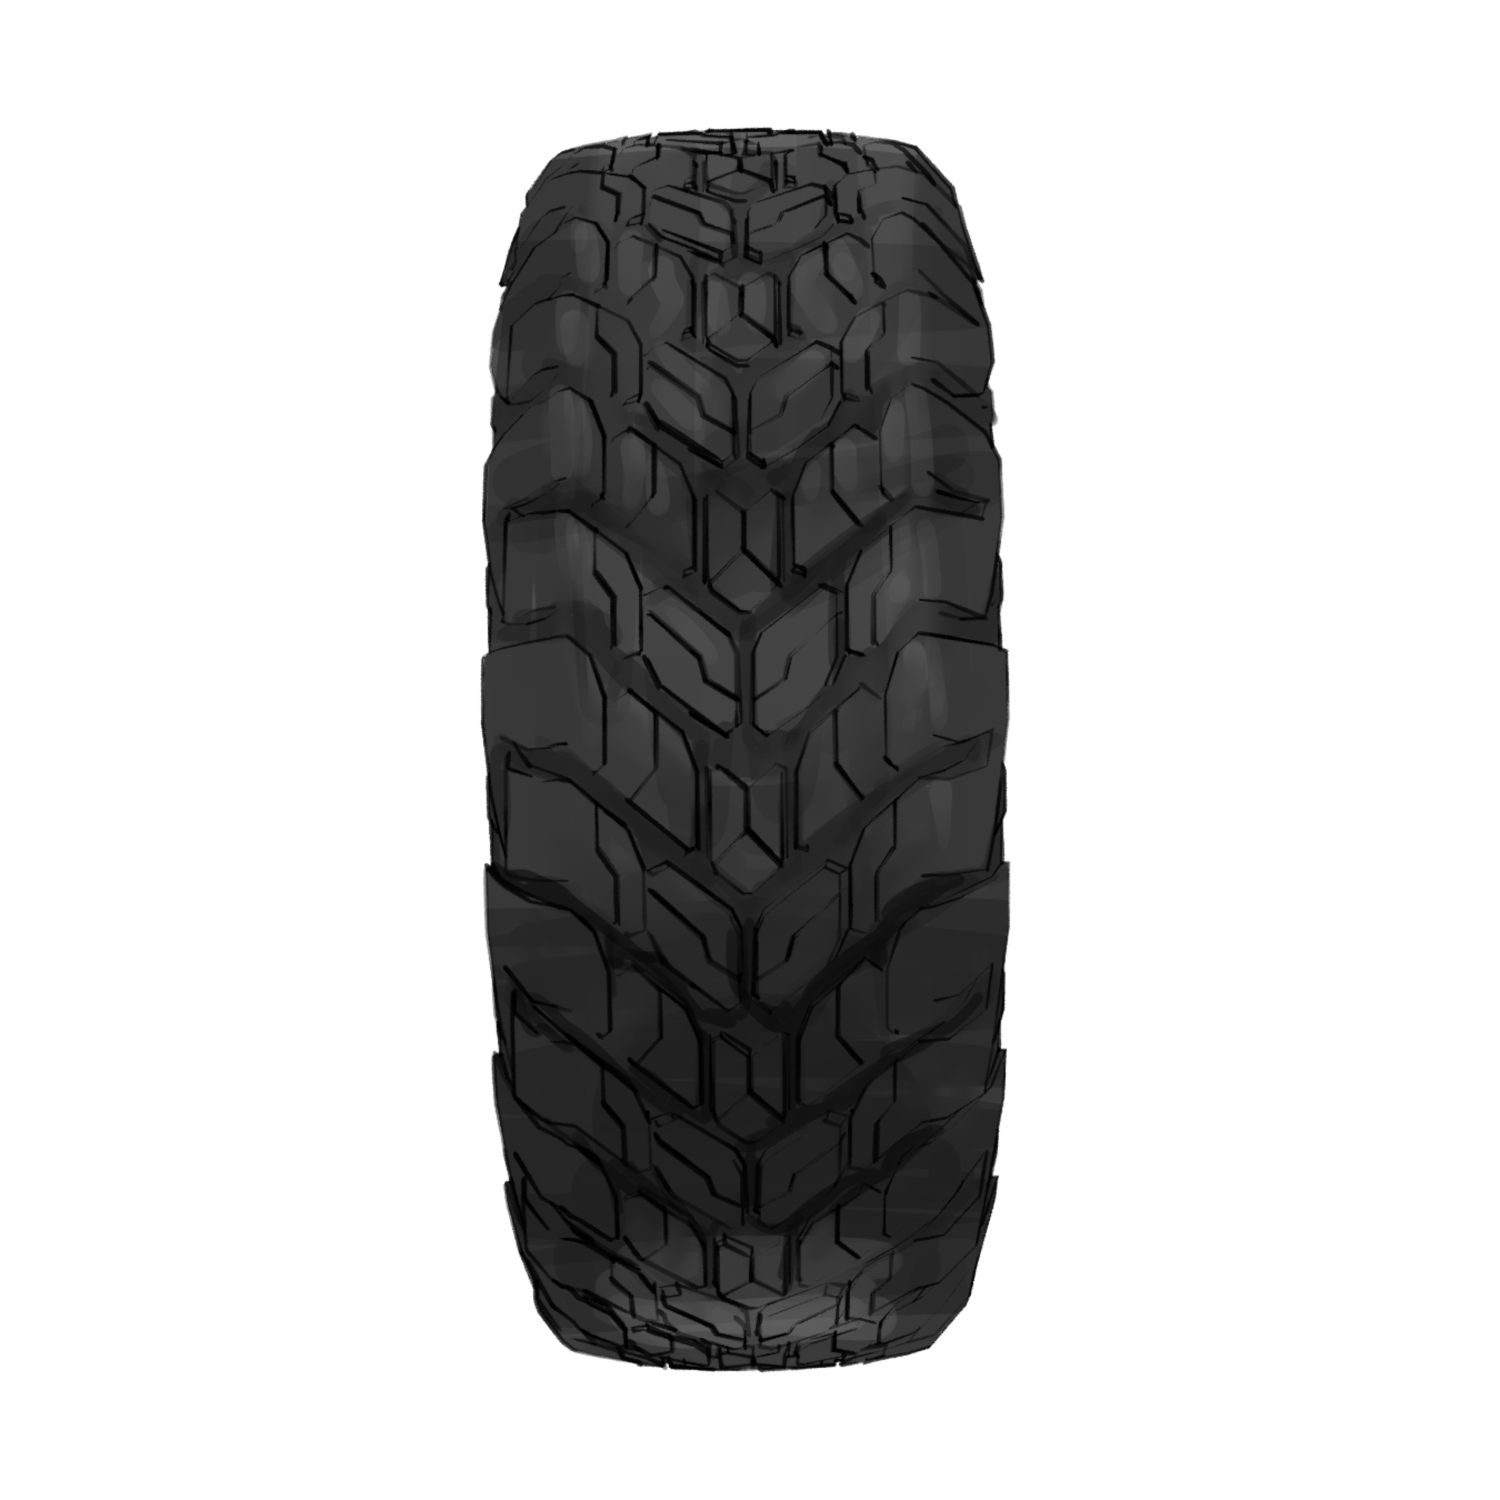  Product image 2 of the product “Tyre Offroad ”